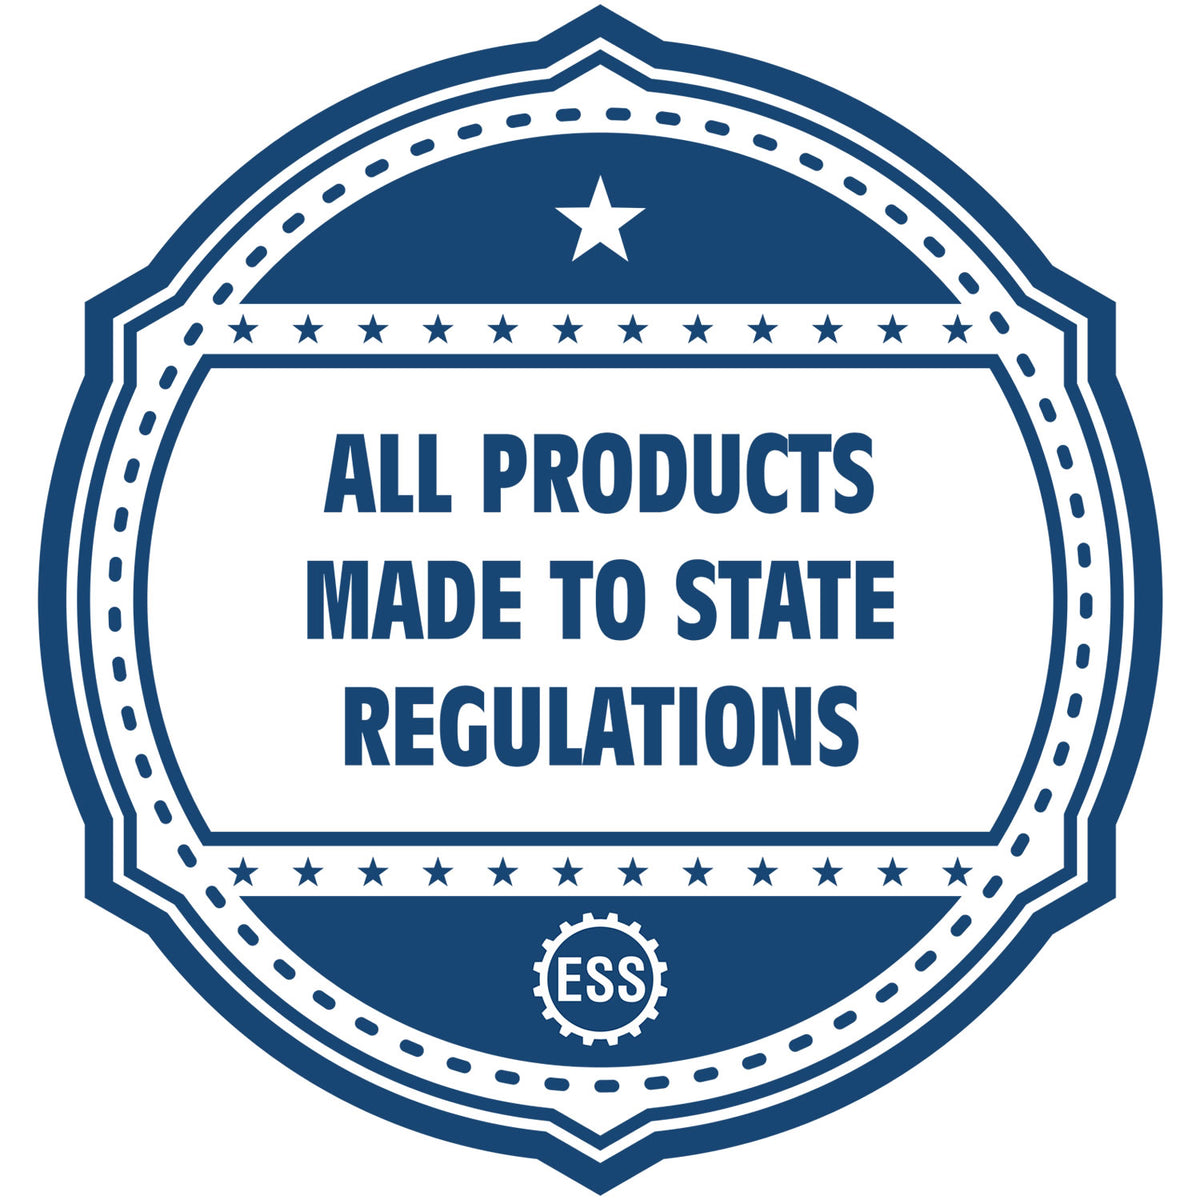 An icon or badge element for the State of Mississippi Extended Long Reach Engineer Seal showing that this product is made in compliance with state regulations.